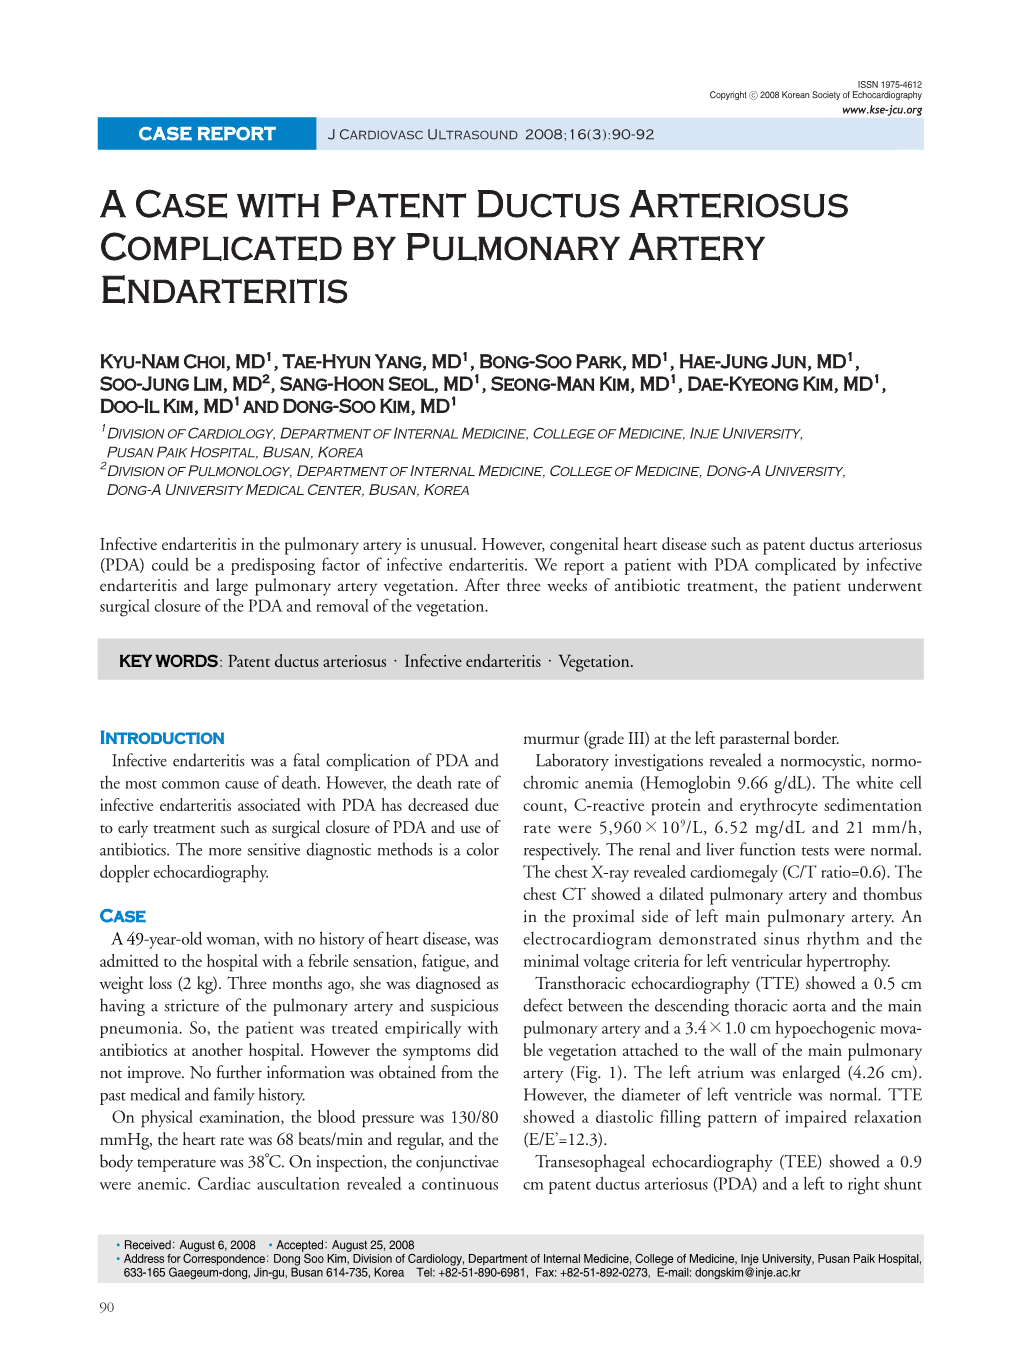 A Case with Patent Ductus Arteriosus Complicated by Pulmonary Artery Endarteritis